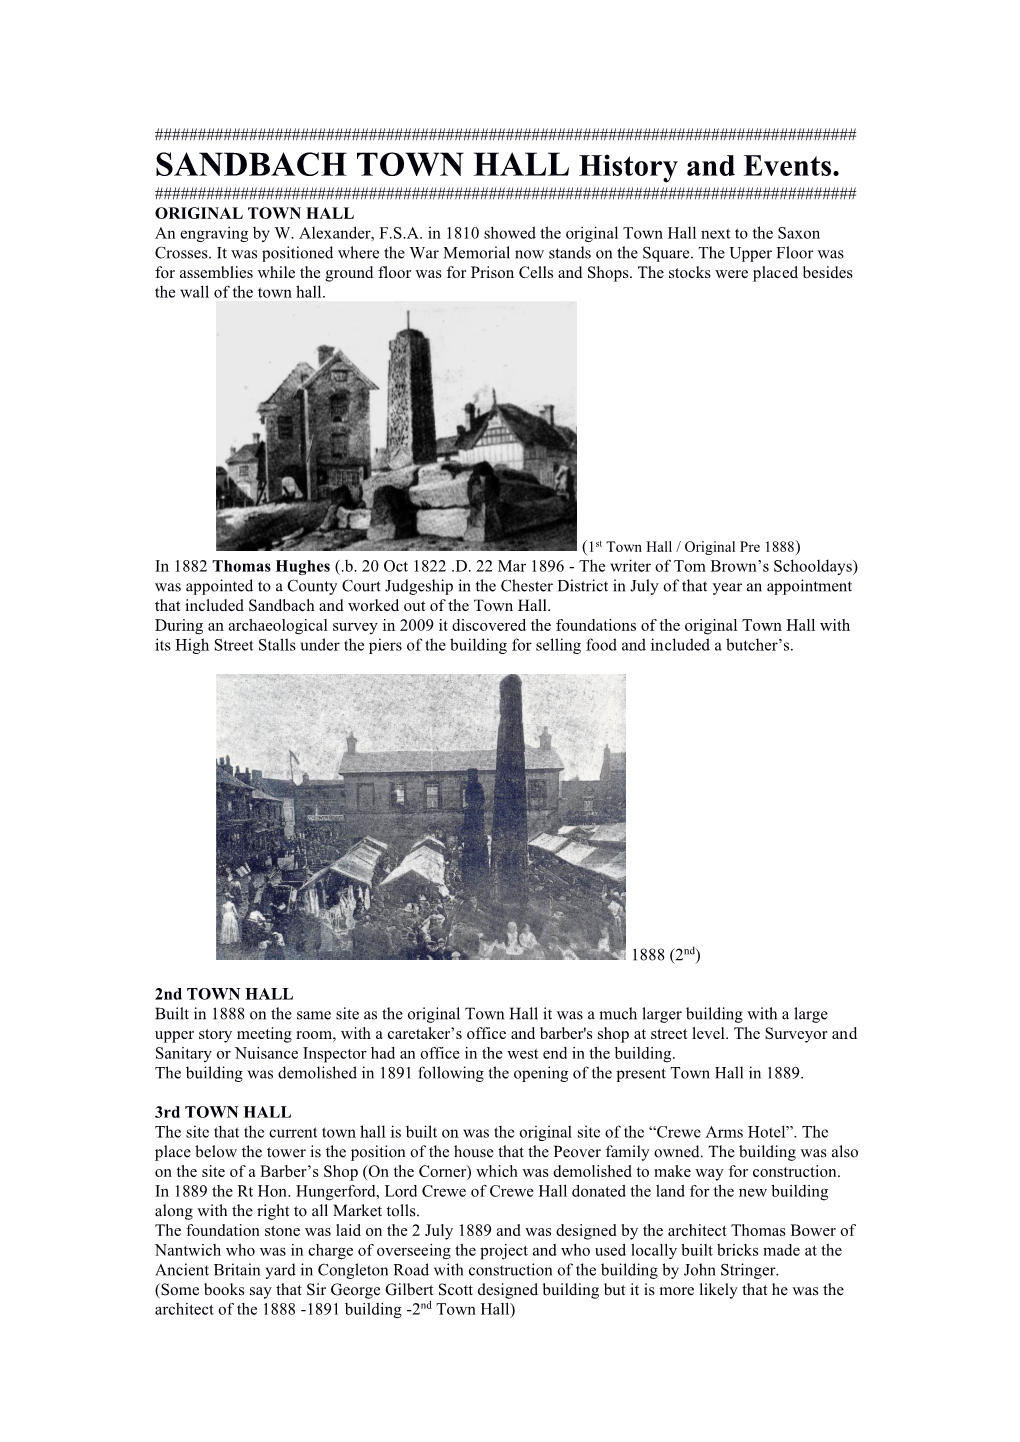 SANDBACH TOWN HALL History and Events. ################################################################################## ORIGINAL TOWN HALL an Engraving by W